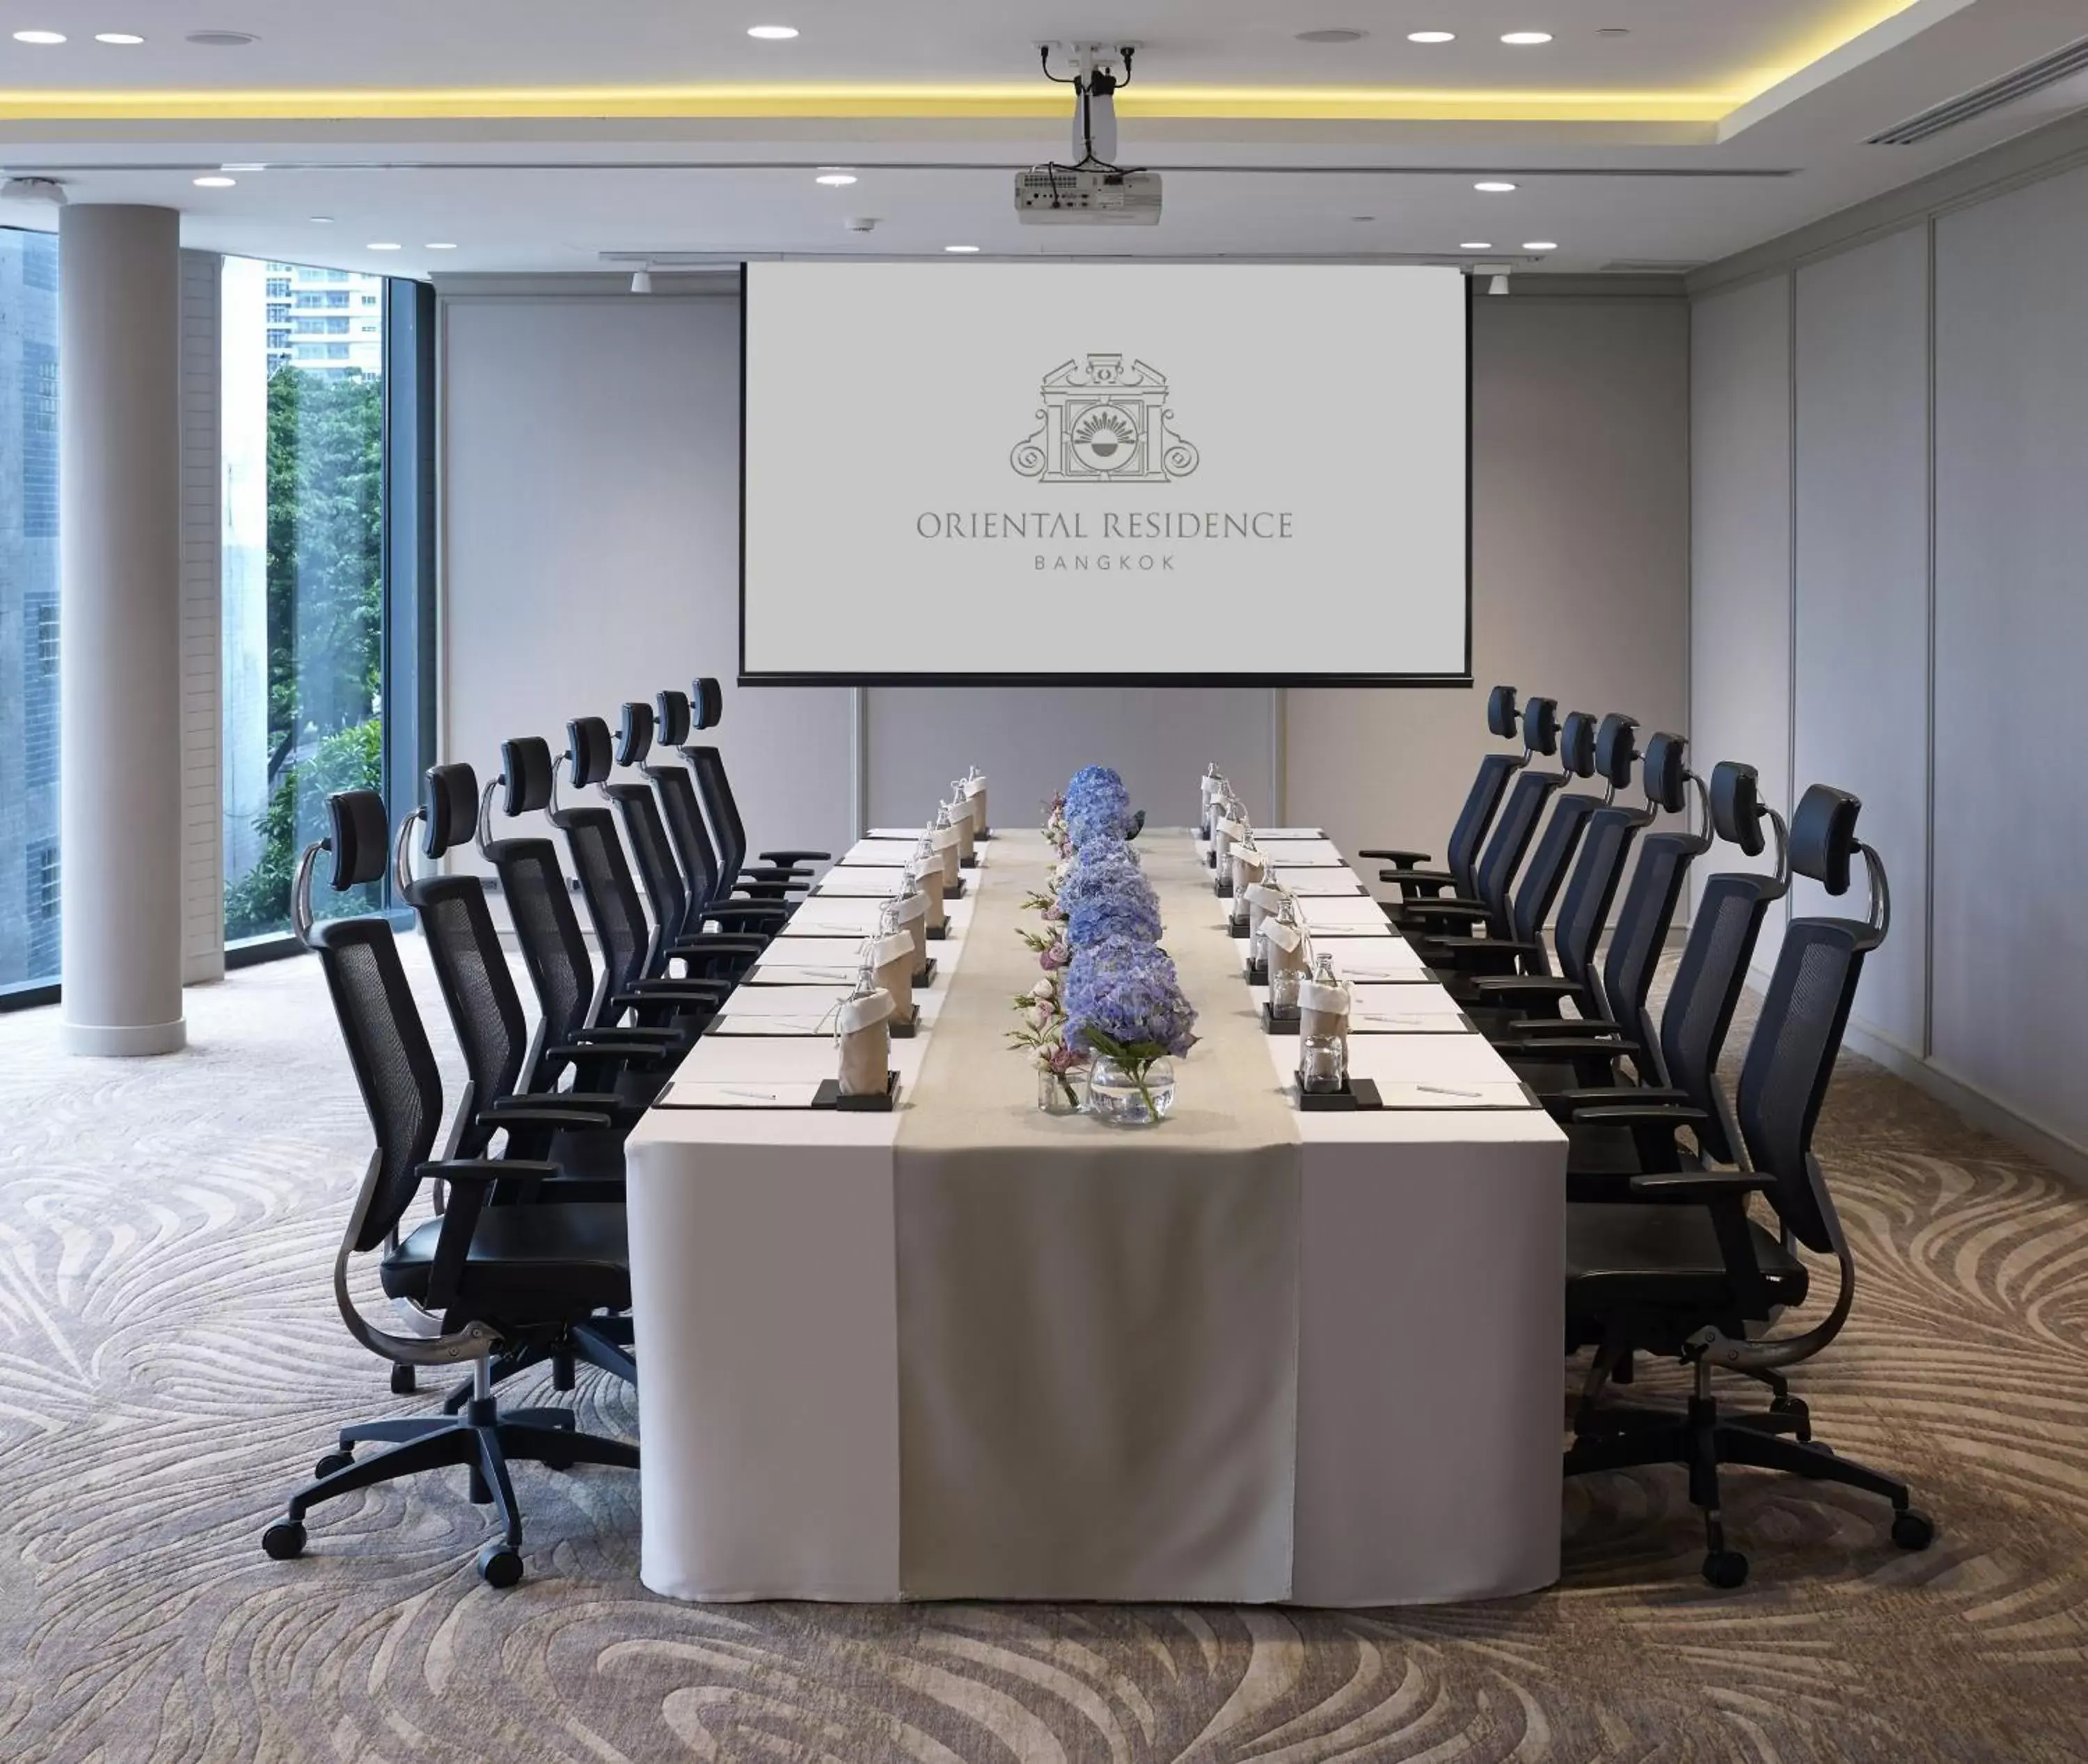 Meeting/conference room in Oriental Residence Bangkok